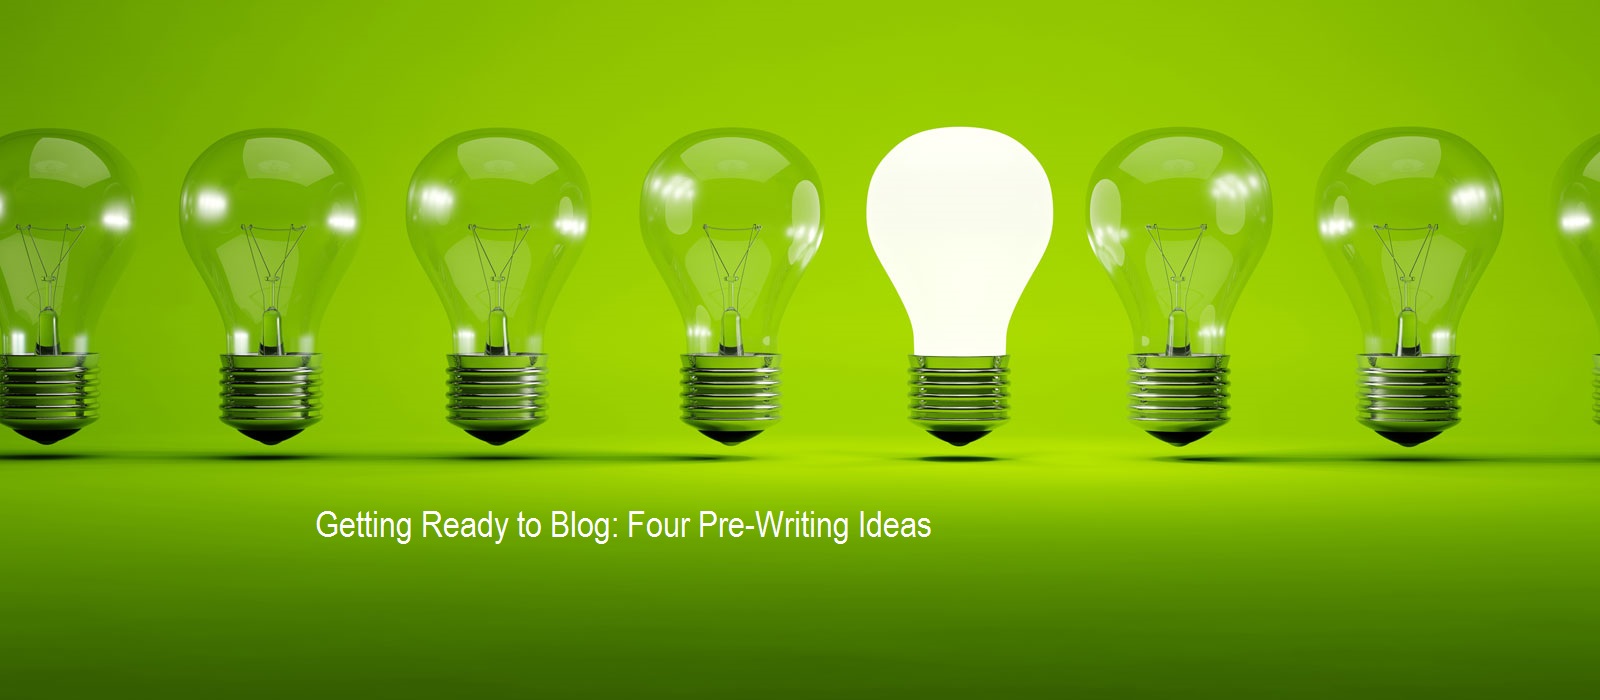 Getting Ready to Blog: Four Pre-Writing Ideas